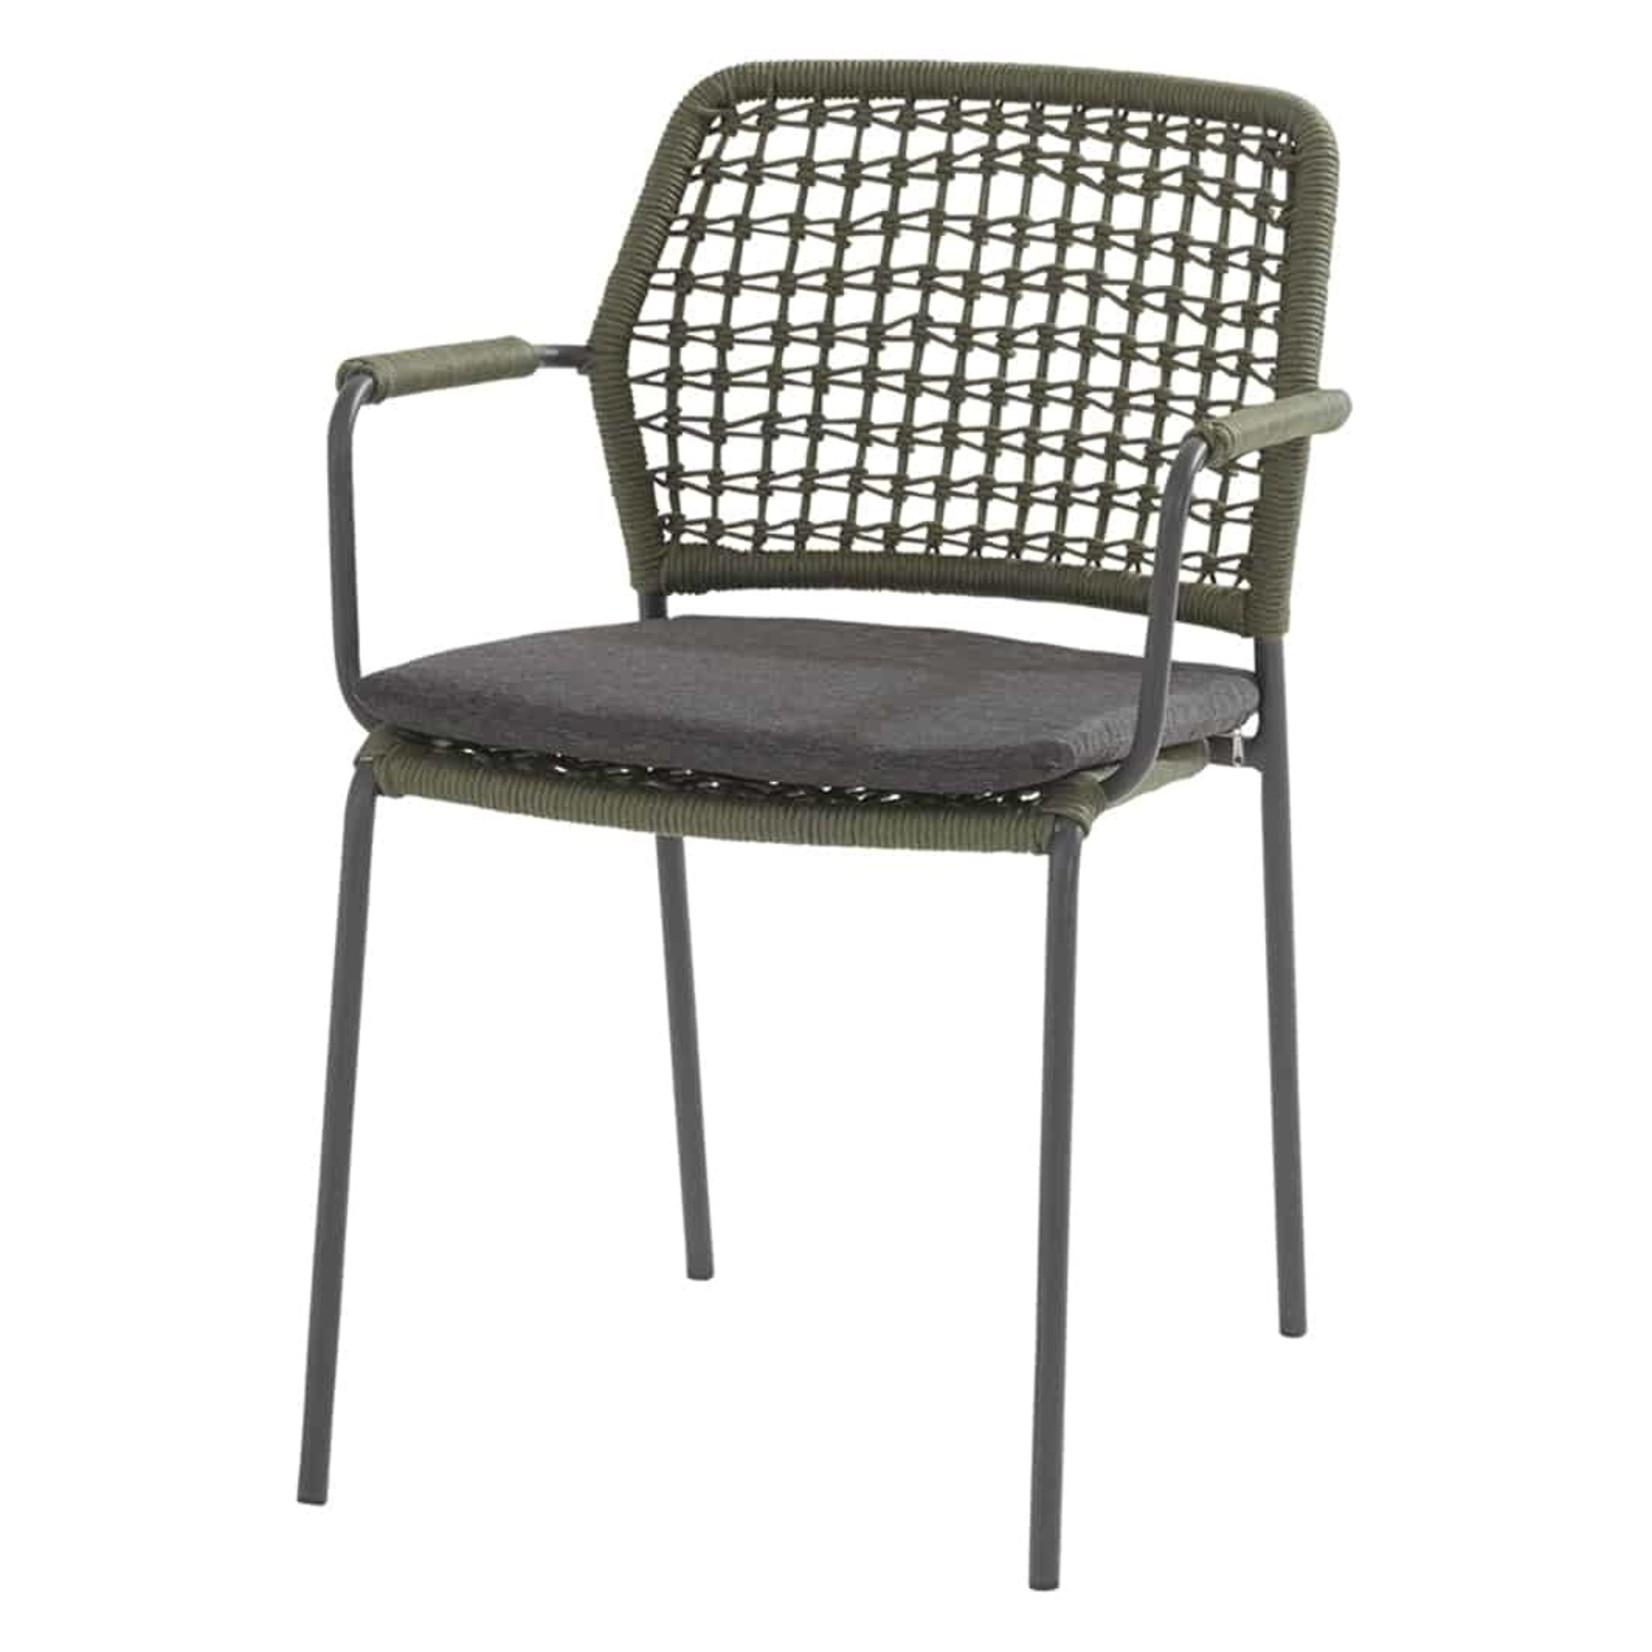 4SO 4SO Barista stacking chair Green with cushion